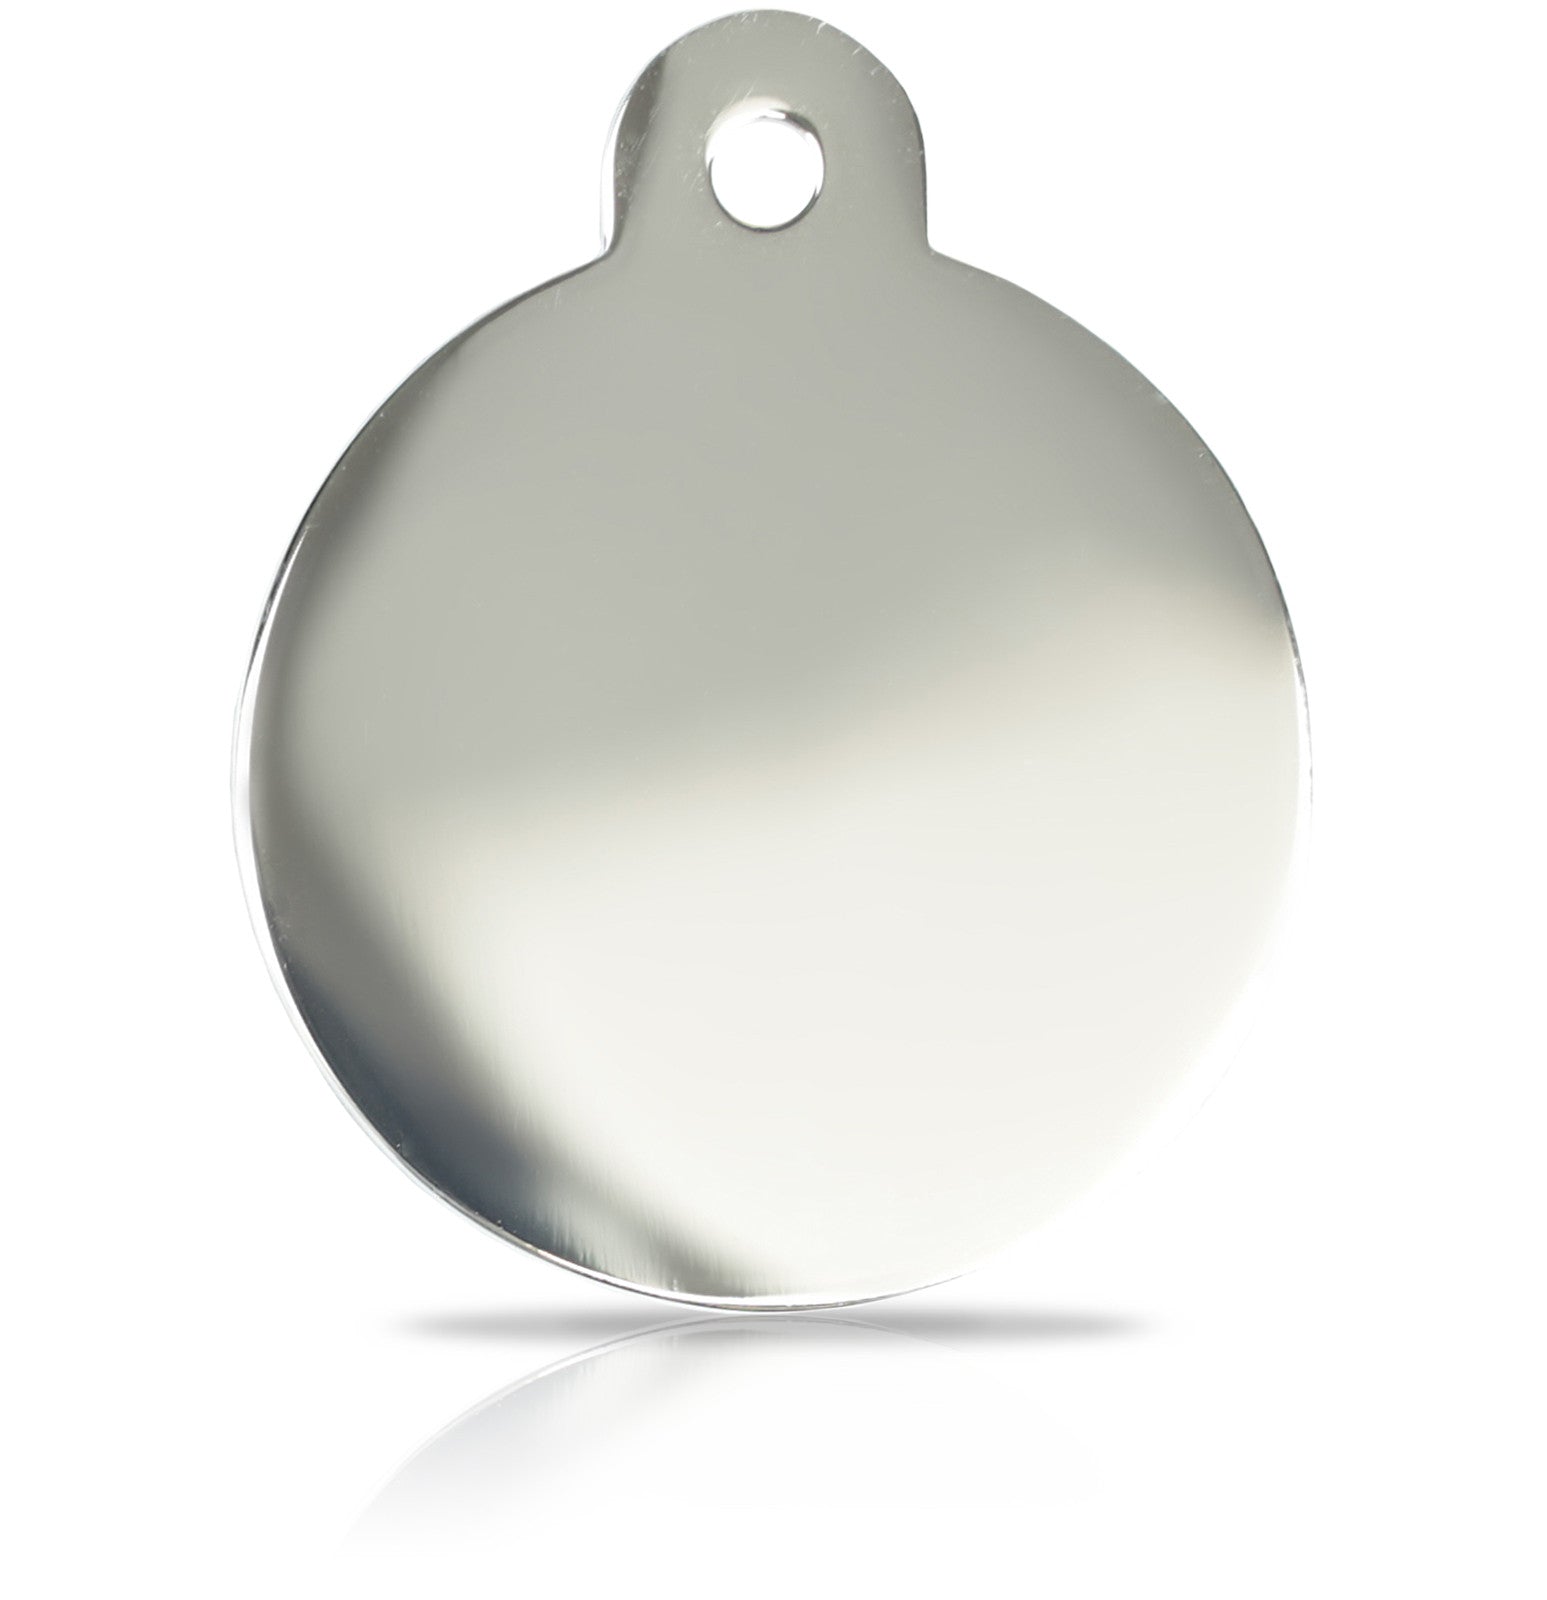 TaggIT Engraving Prestige Silver Large Disc iMarc Pet ID Tag